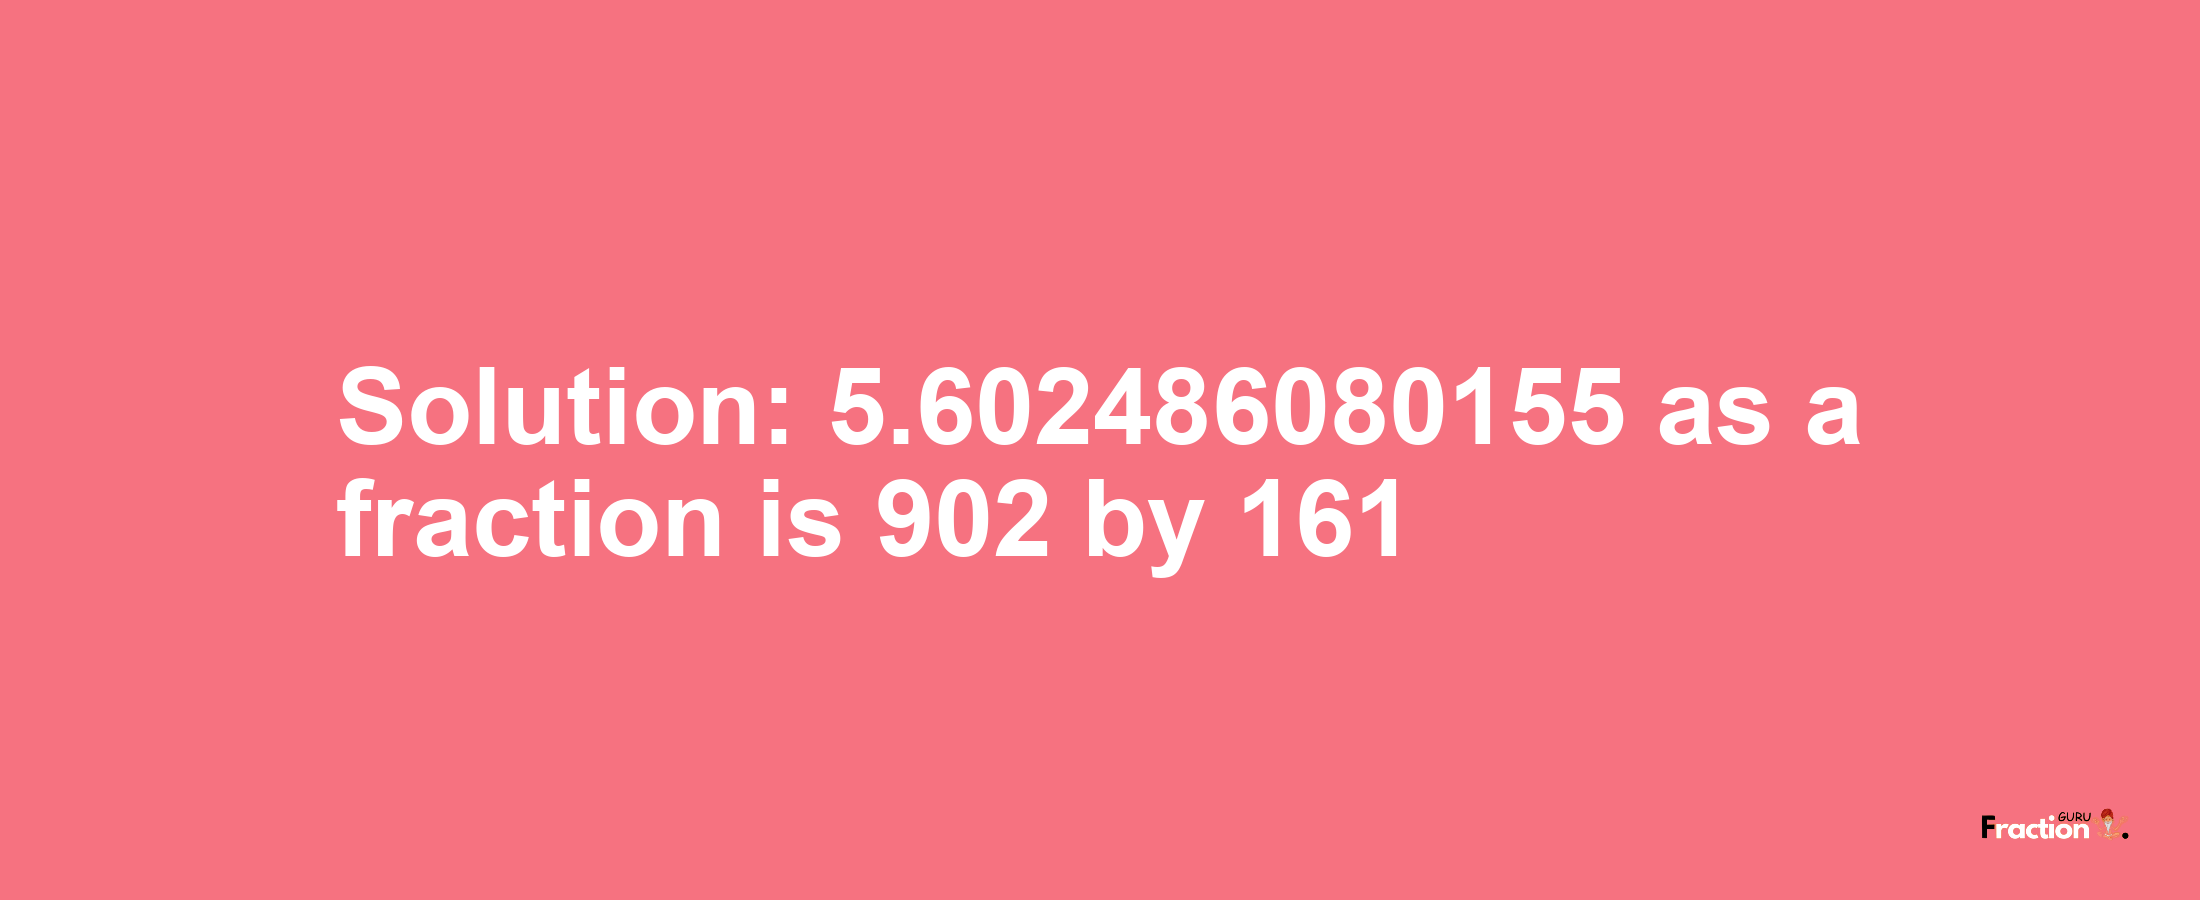 Solution:5.602486080155 as a fraction is 902/161